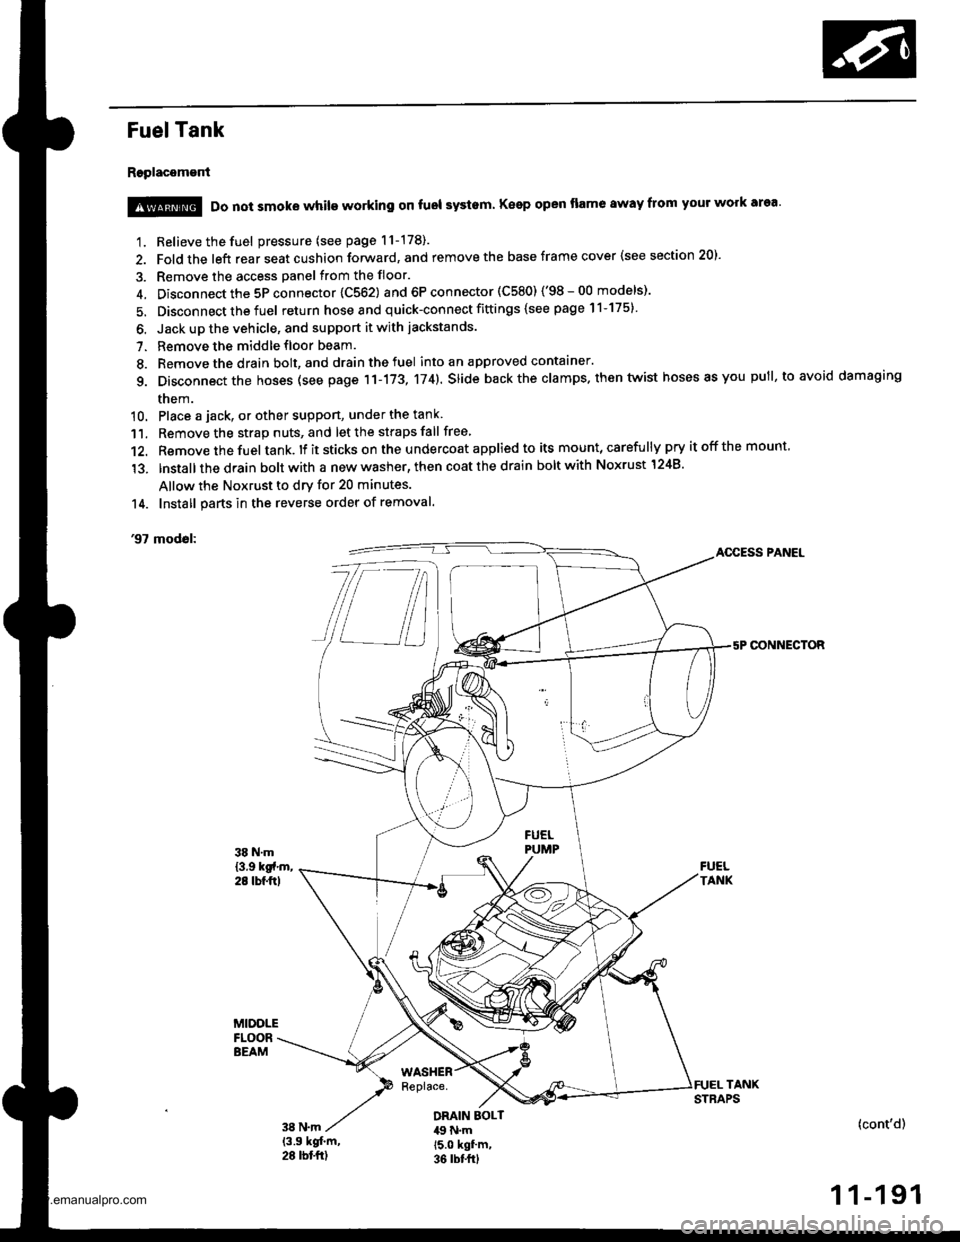 HONDA CR-V 1998 RD1-RD3 / 1.G Workshop Manual 
Fuel Tank
Replacement
1. Relieve the fuel pressure (see page 11-178).
2. Fold the left rear seat cushion forward, and remove the base frame cover {see section 20).
3. Remove the access panel from the